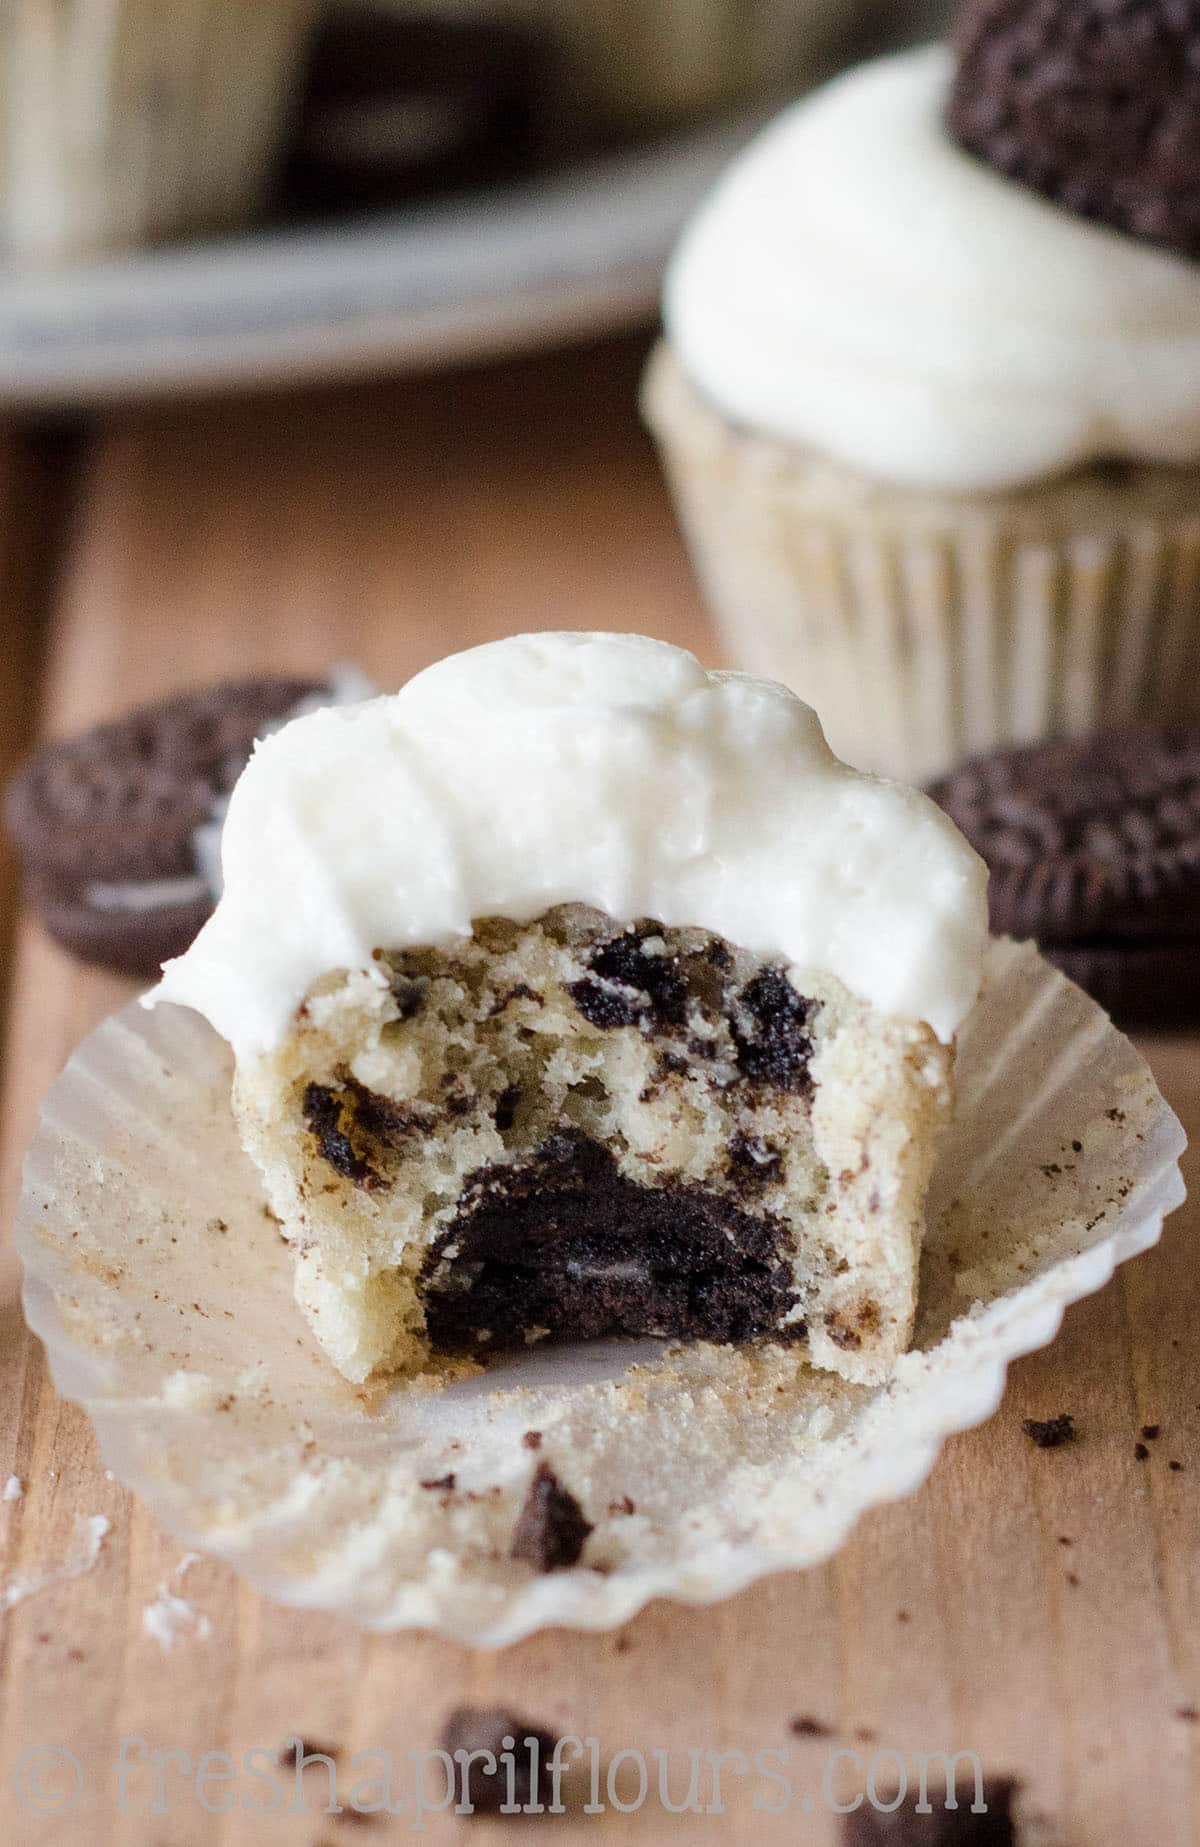 A mini cookies and cream cupcake with a bite taken out of it.